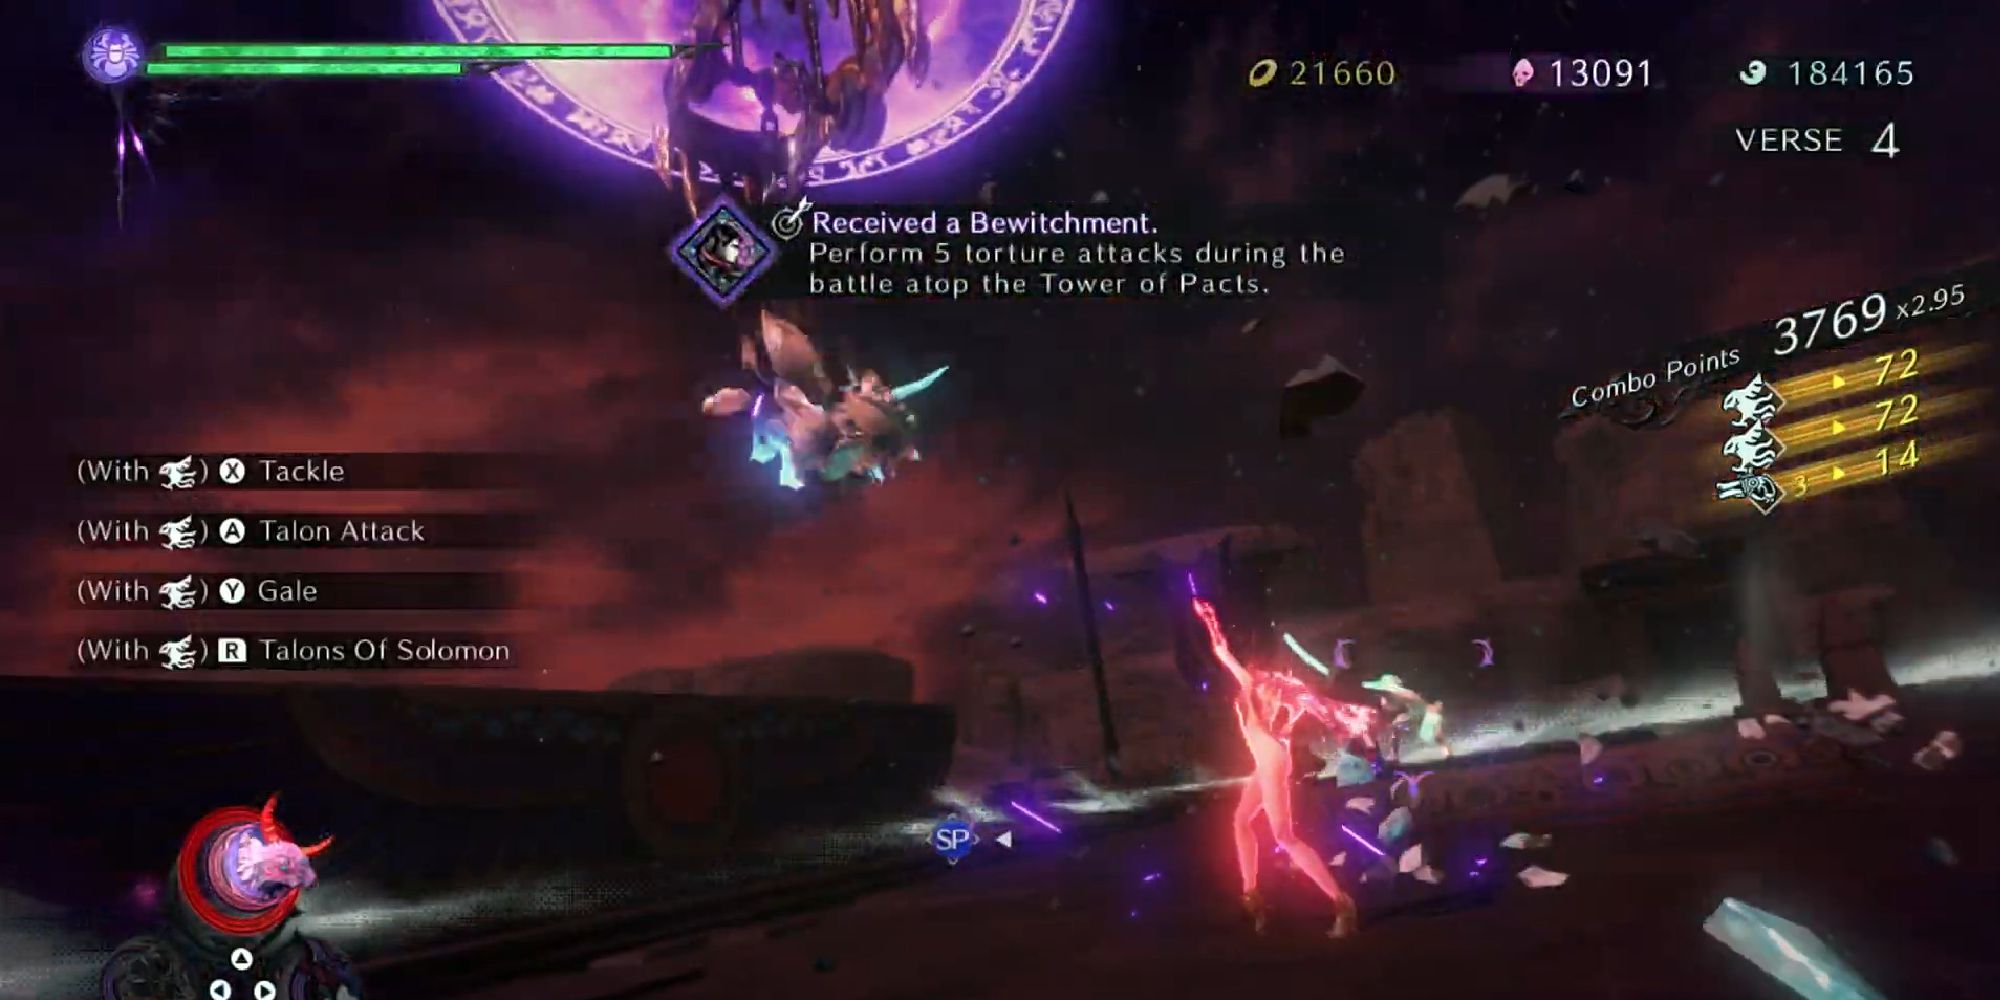 bayonetta 3 chapter 9 verse 4 torture attack bewitchment